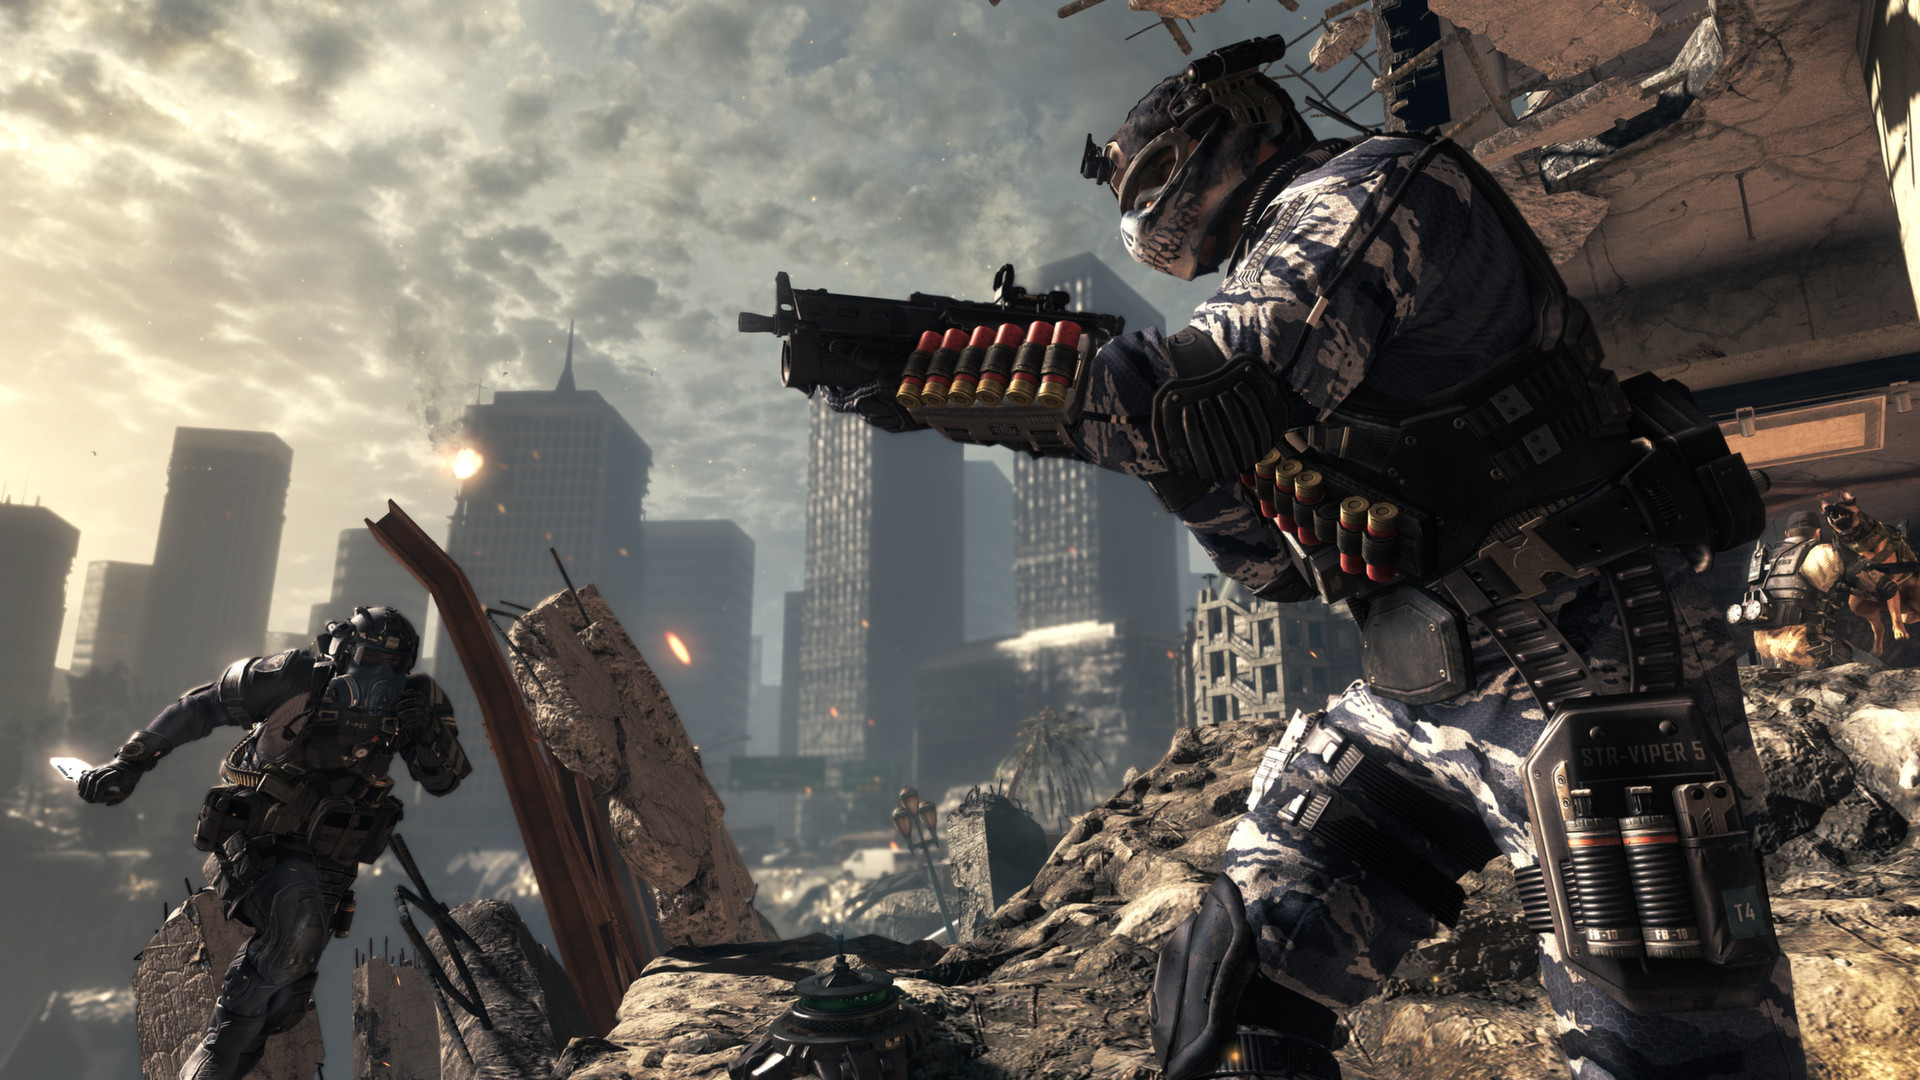 How to Install Call of Duty Ghosts Onslaught DLC PC - video